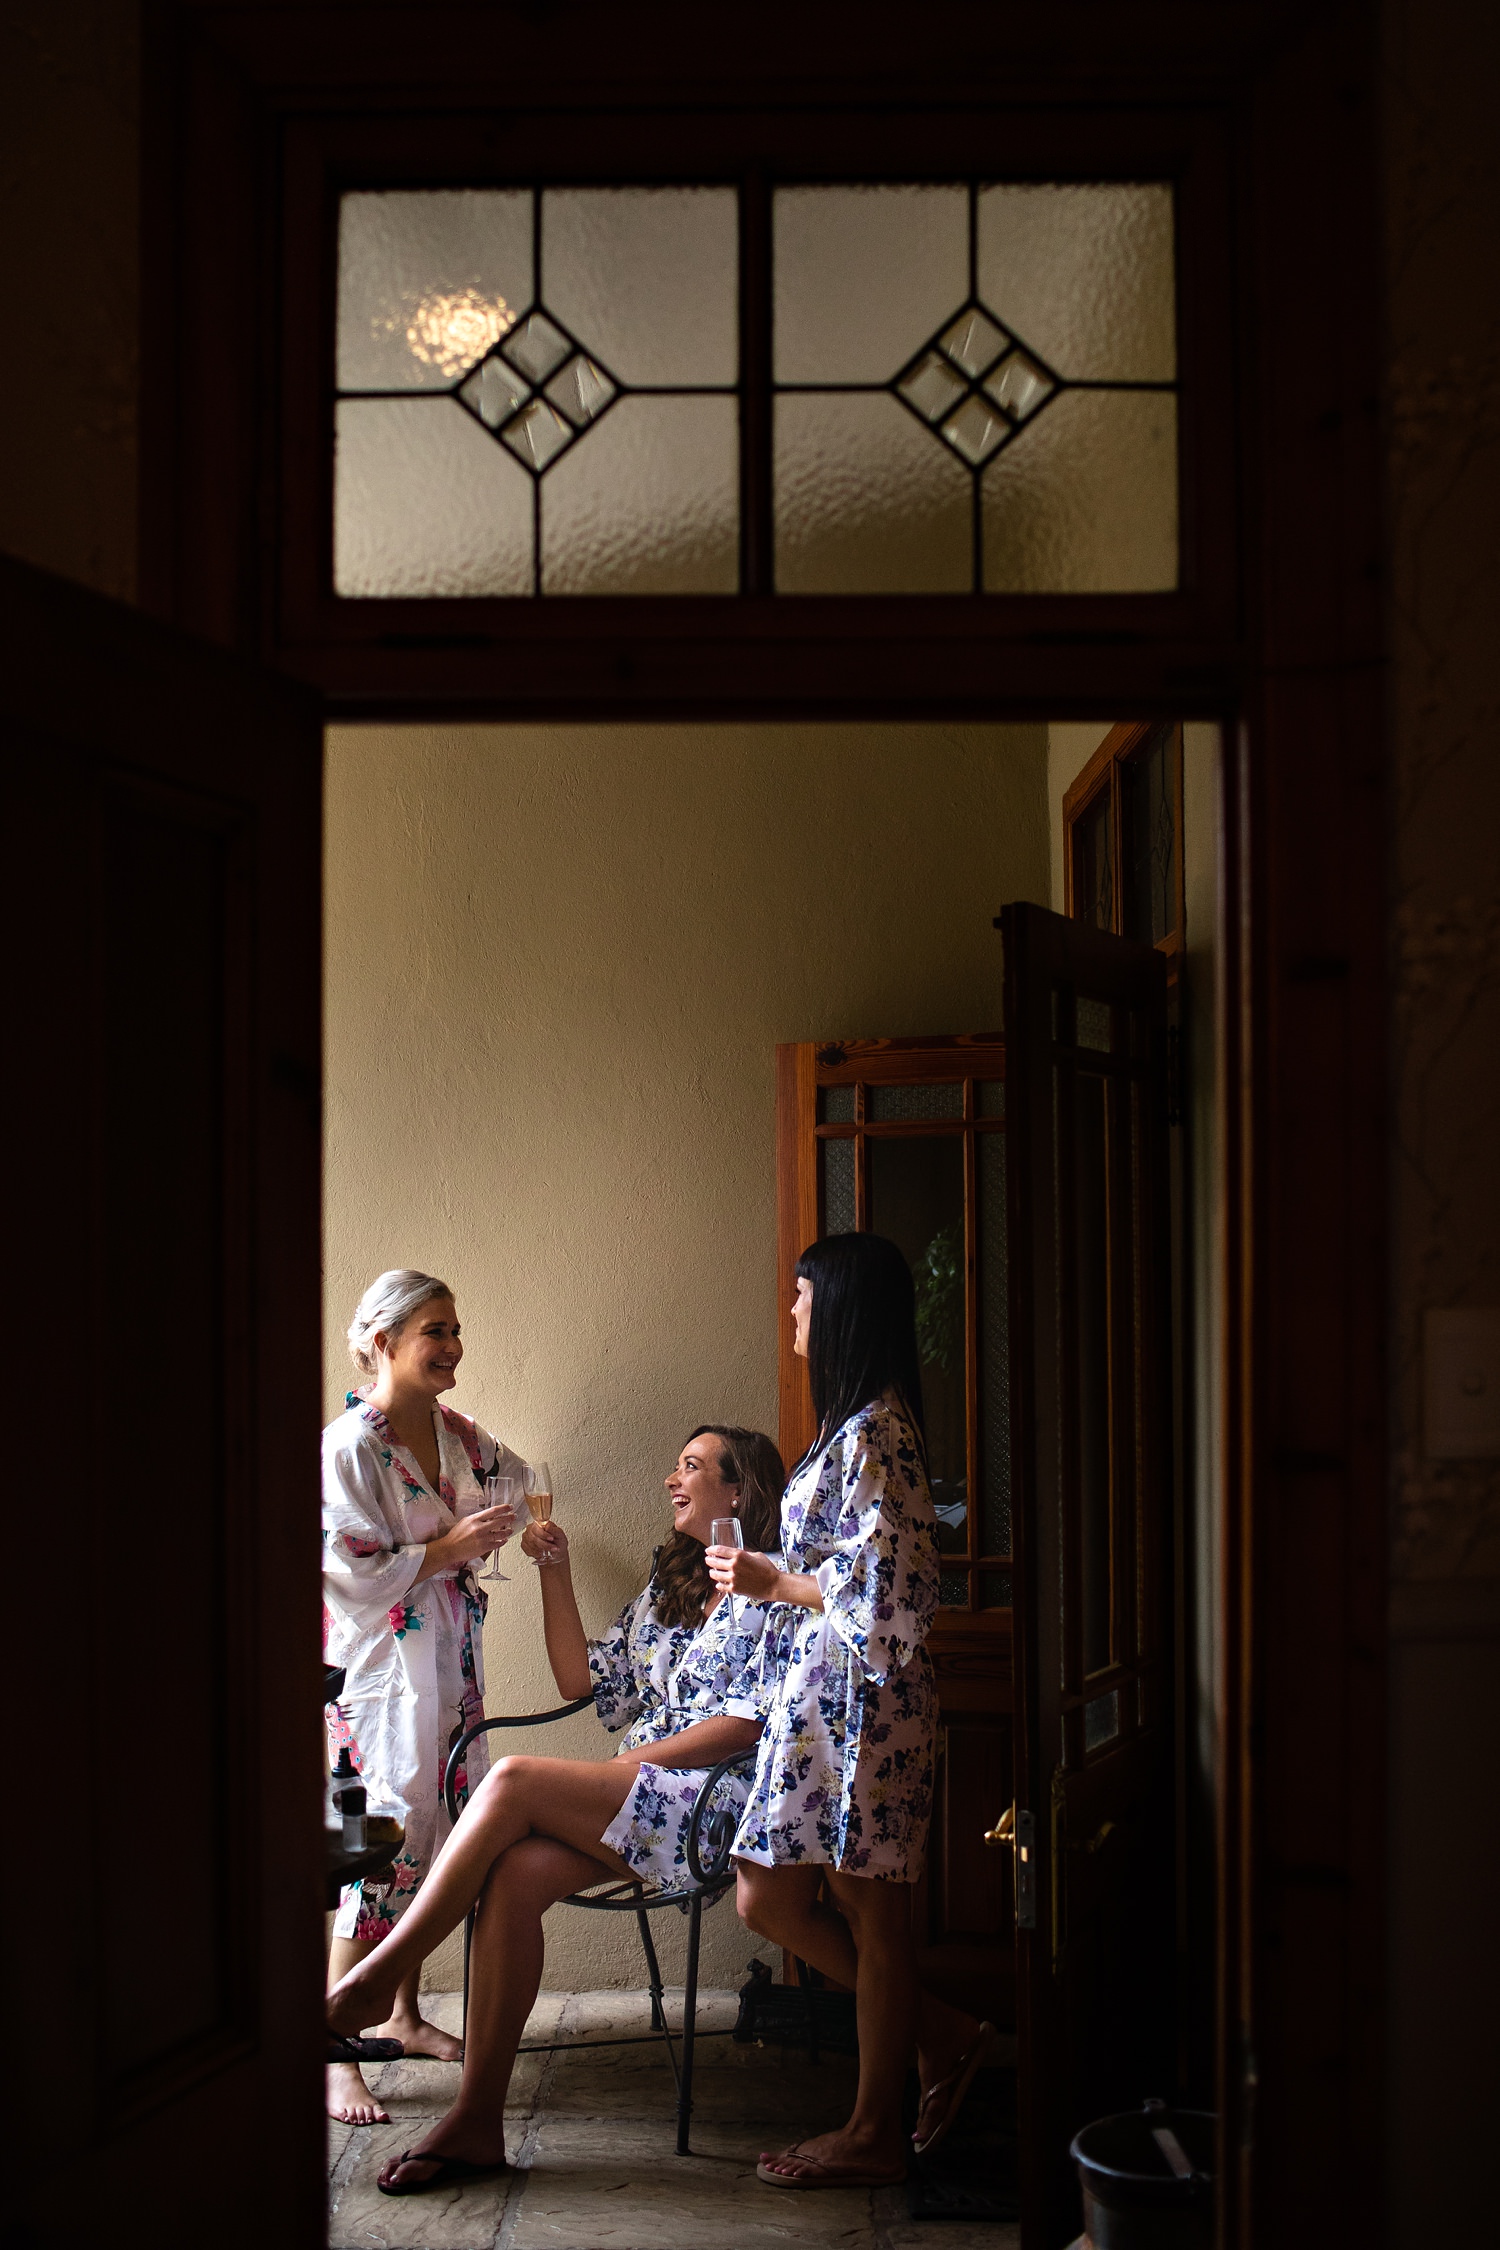 A bride laughs and toasts champagne with her two bridesmaids to celebrate love, dressed in floral silk gowns at Morrells wedding venue, image framed by an antique door